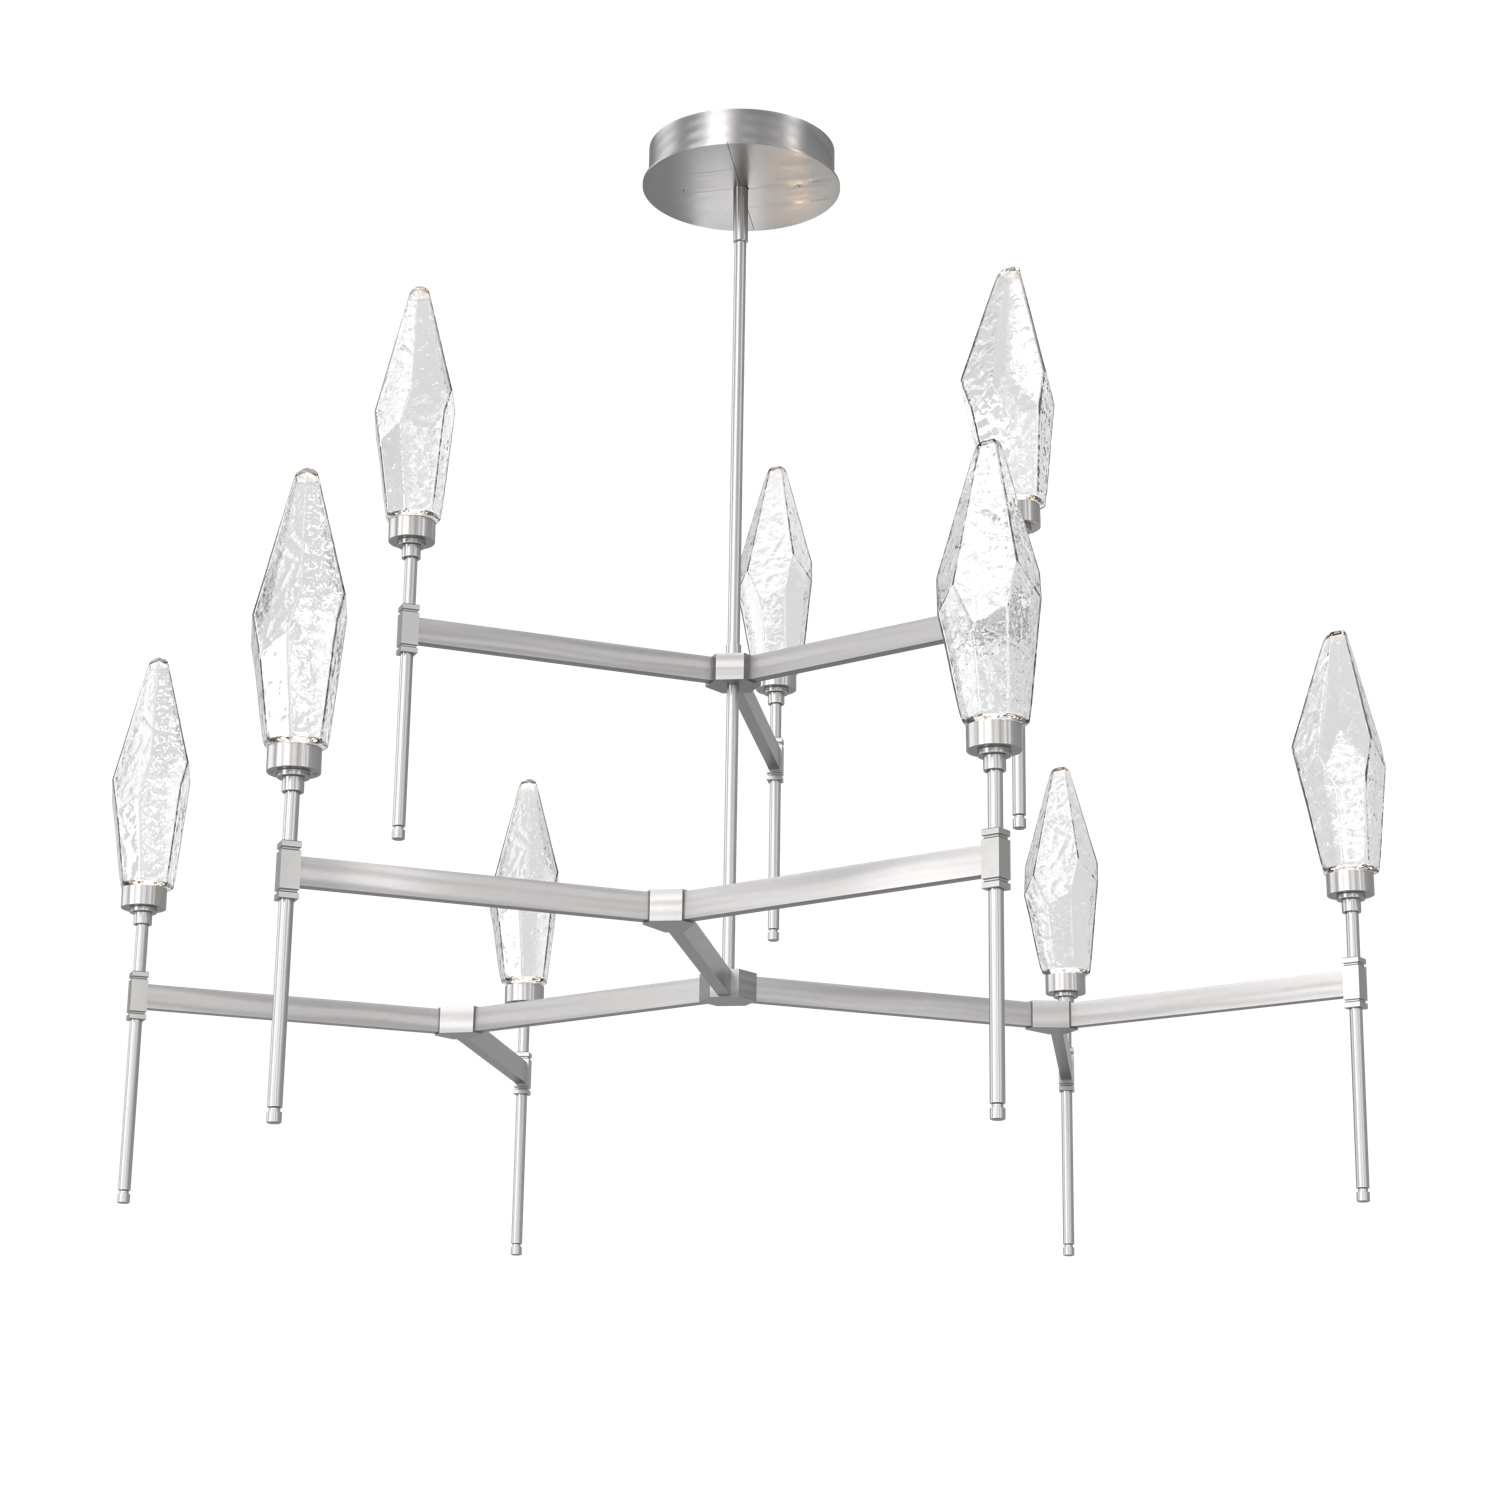 CHB0050-54-SN-CC-Hammerton-Studio-Rock-Crystal-54-inch-round-two-tier-belvedere-chandelier-with-satin-nickel-finish-and-clear-glass-shades-and-LED-lamping